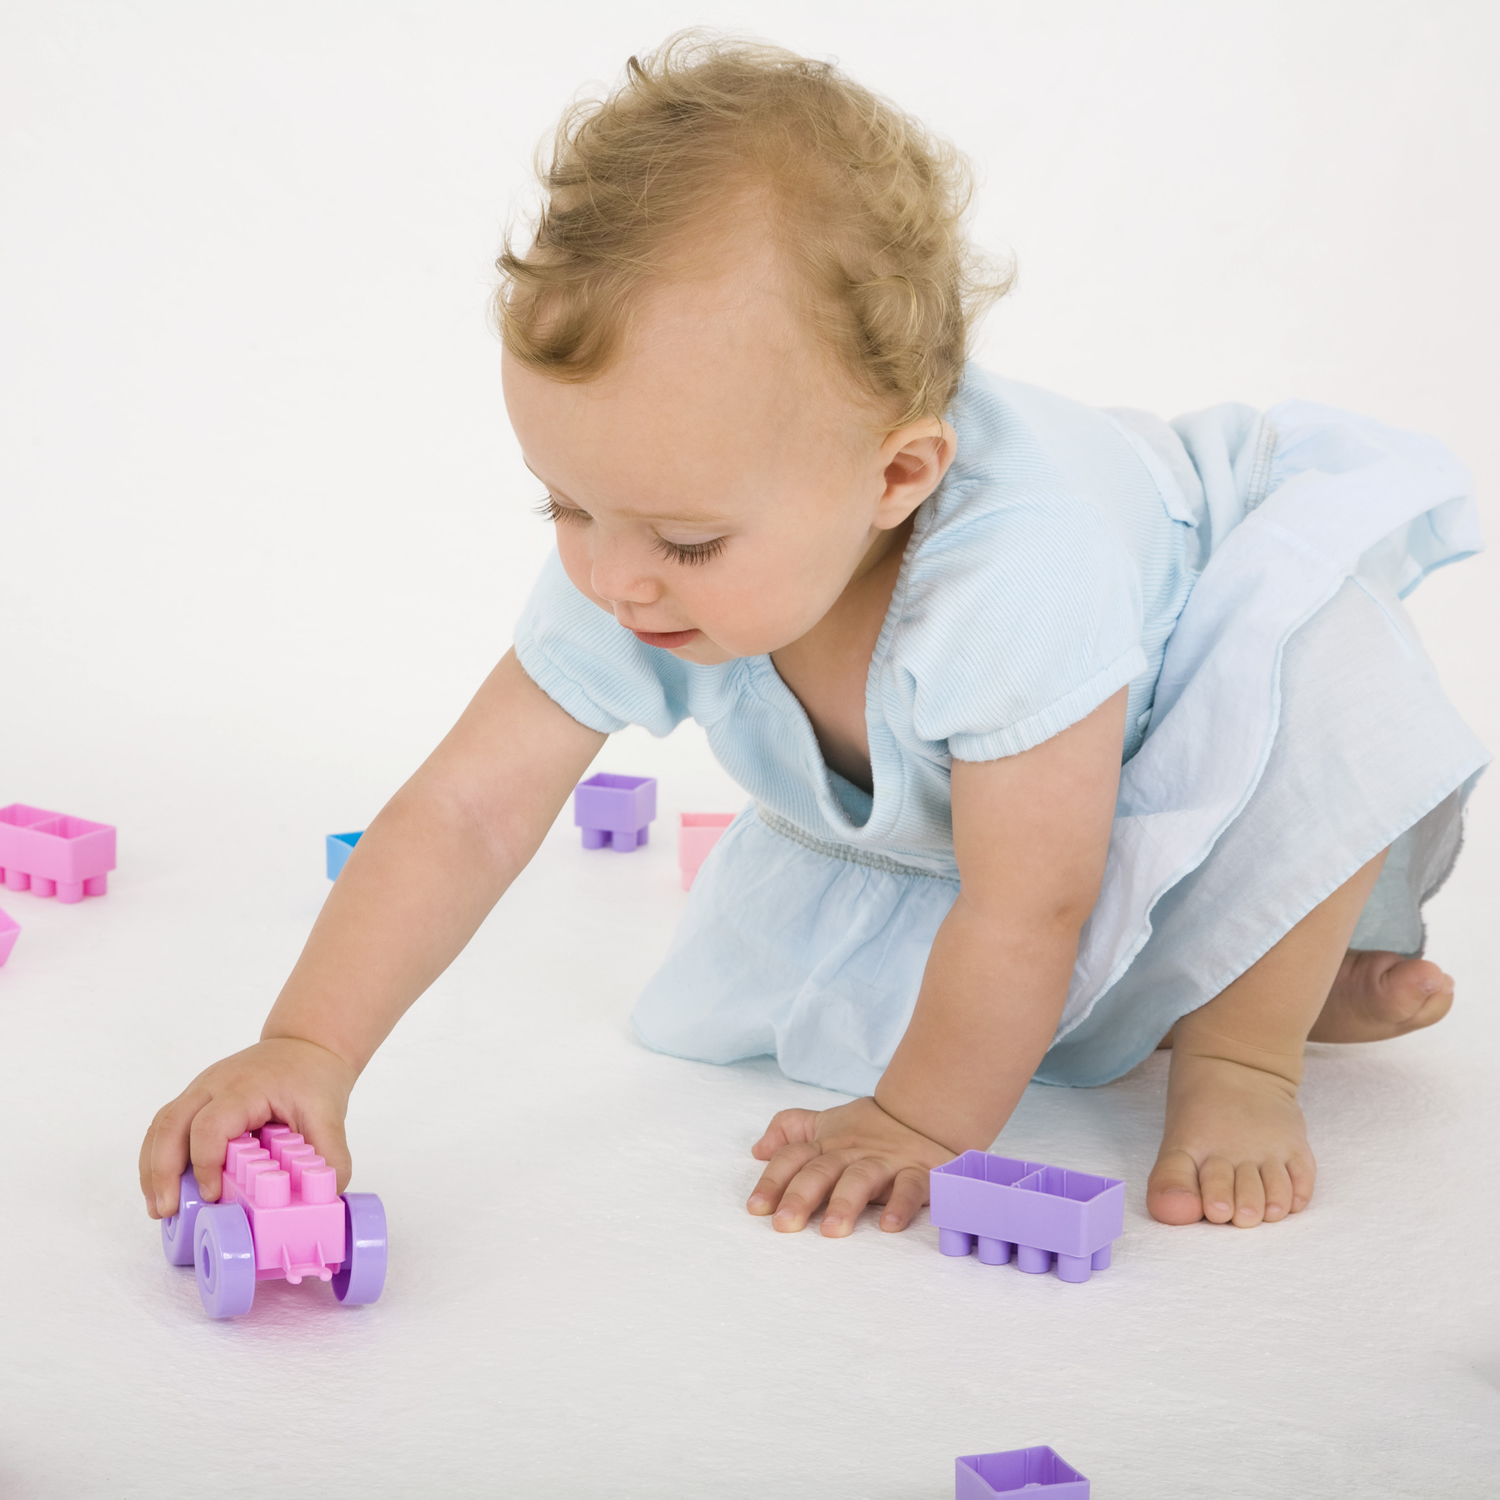 Easy language development games for babies.